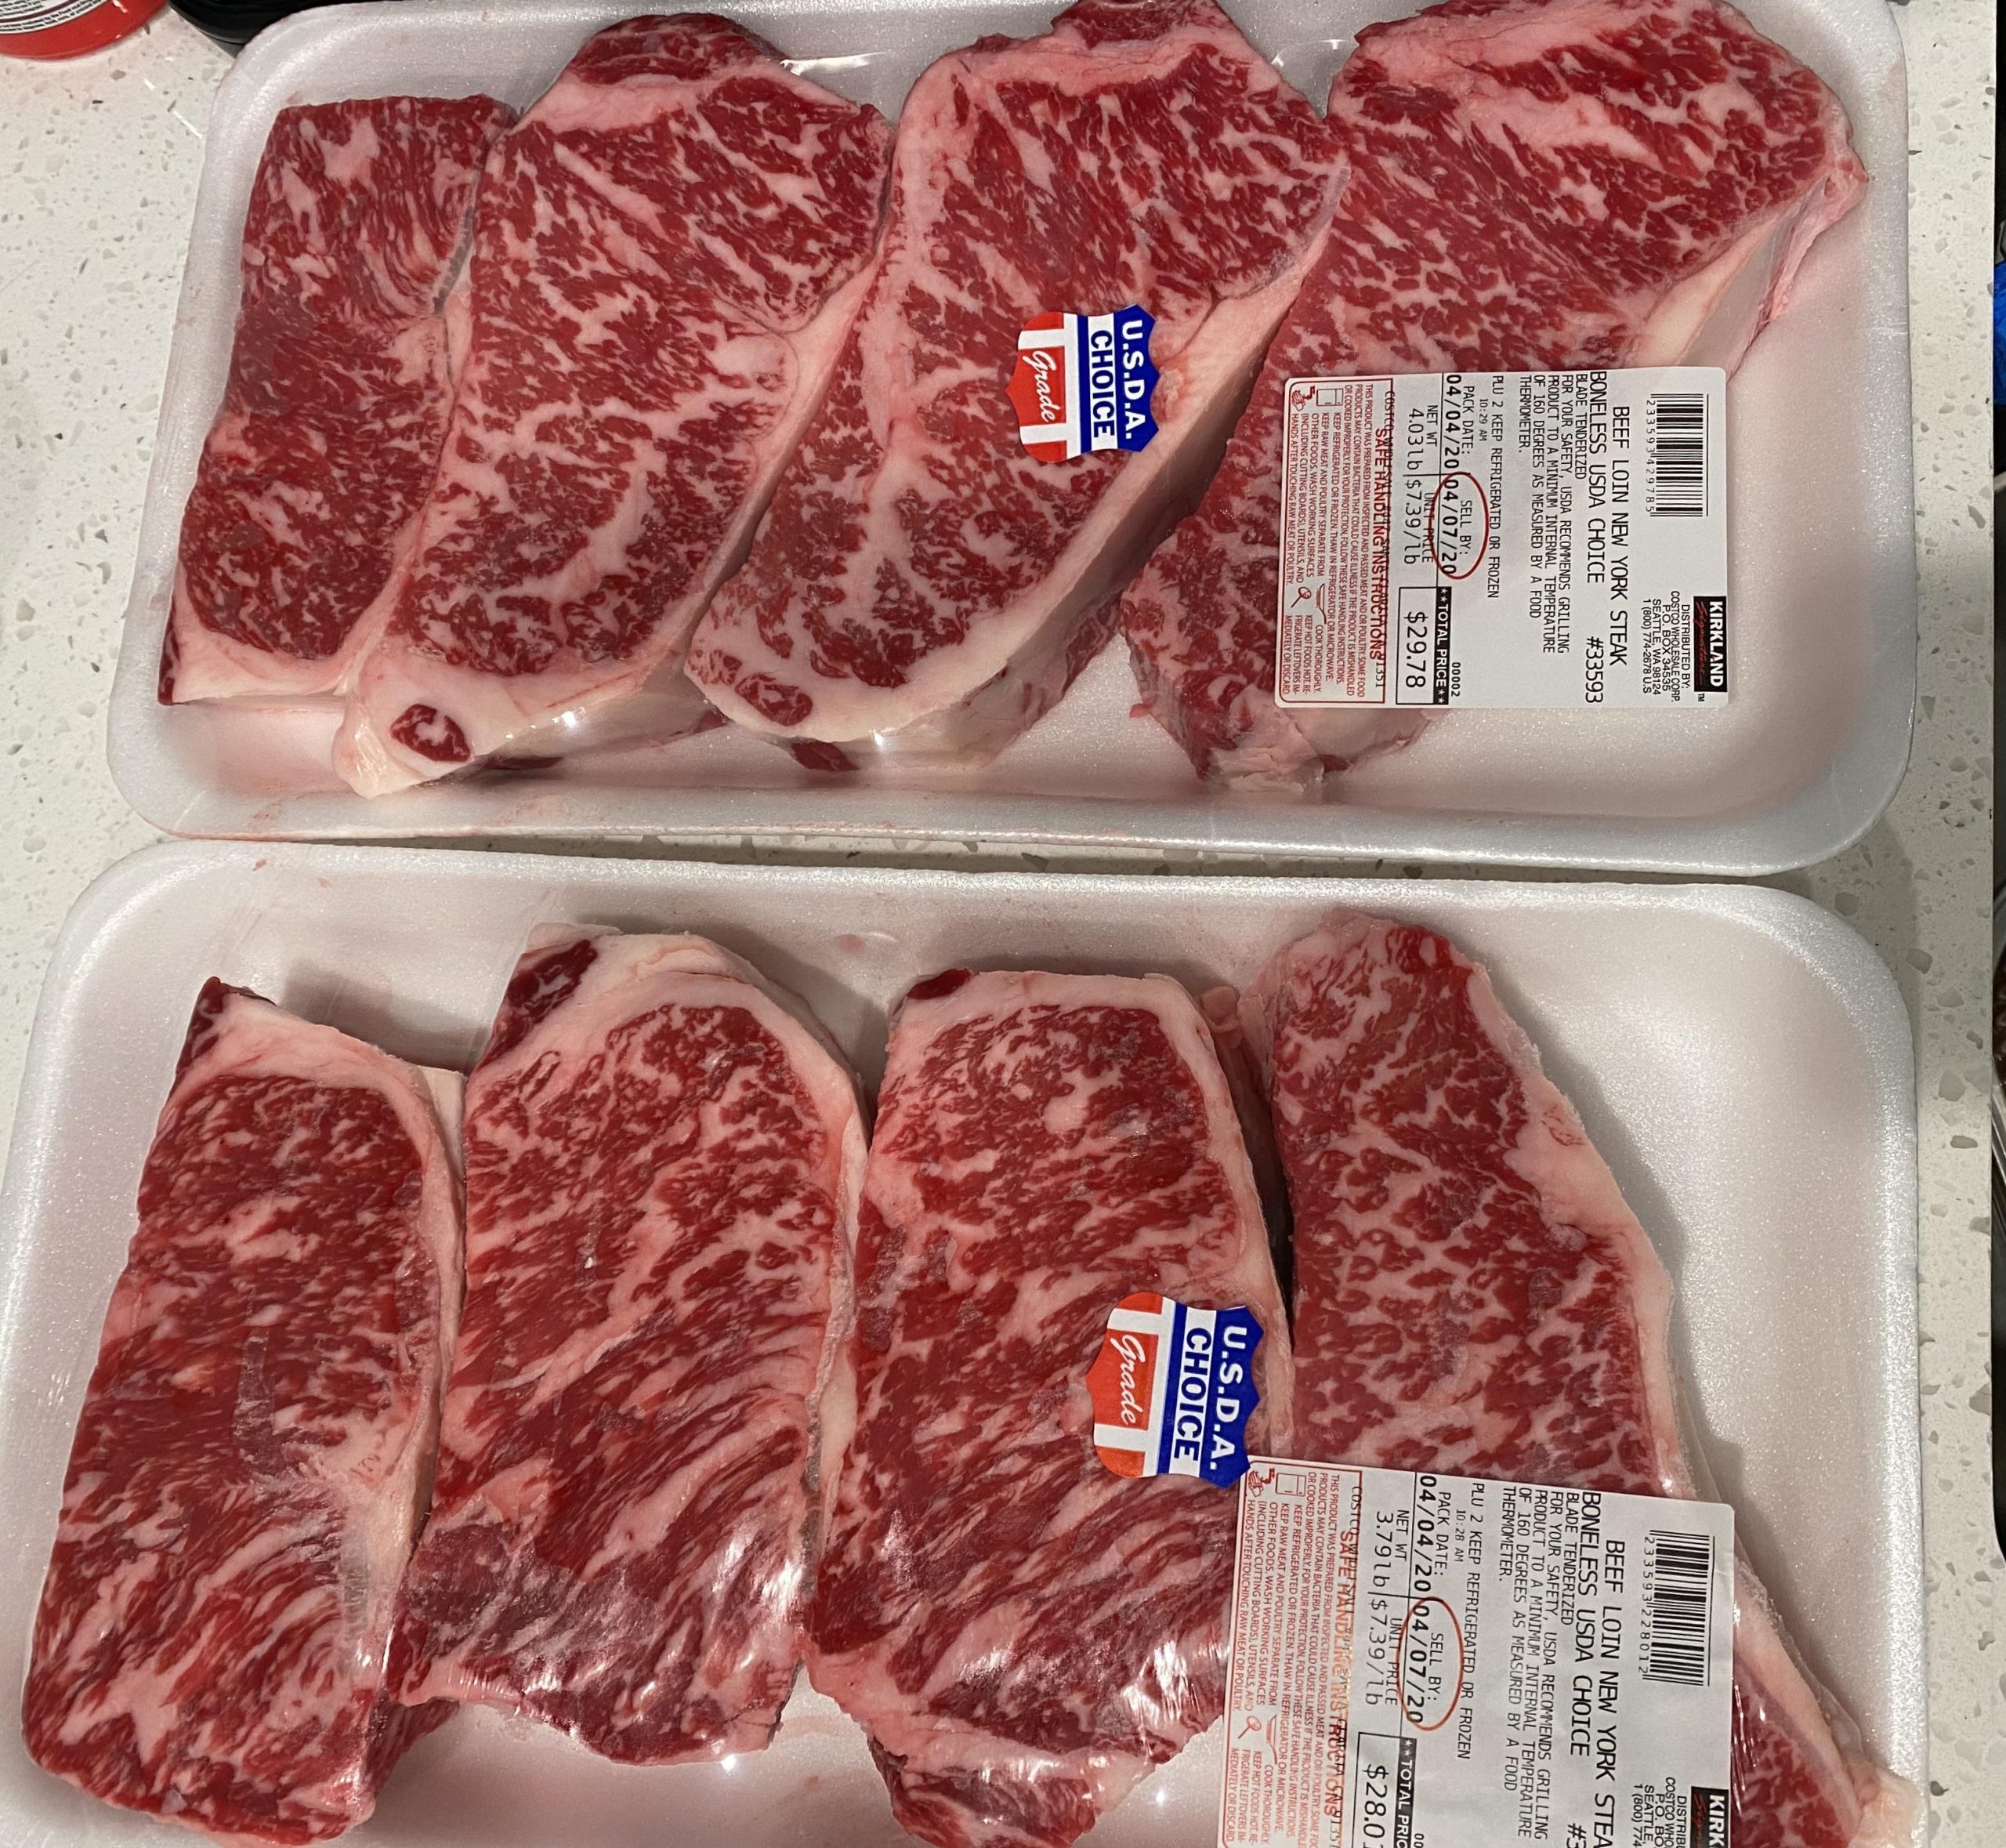 Found these choice? New Yorks at Costco yesterday : steak